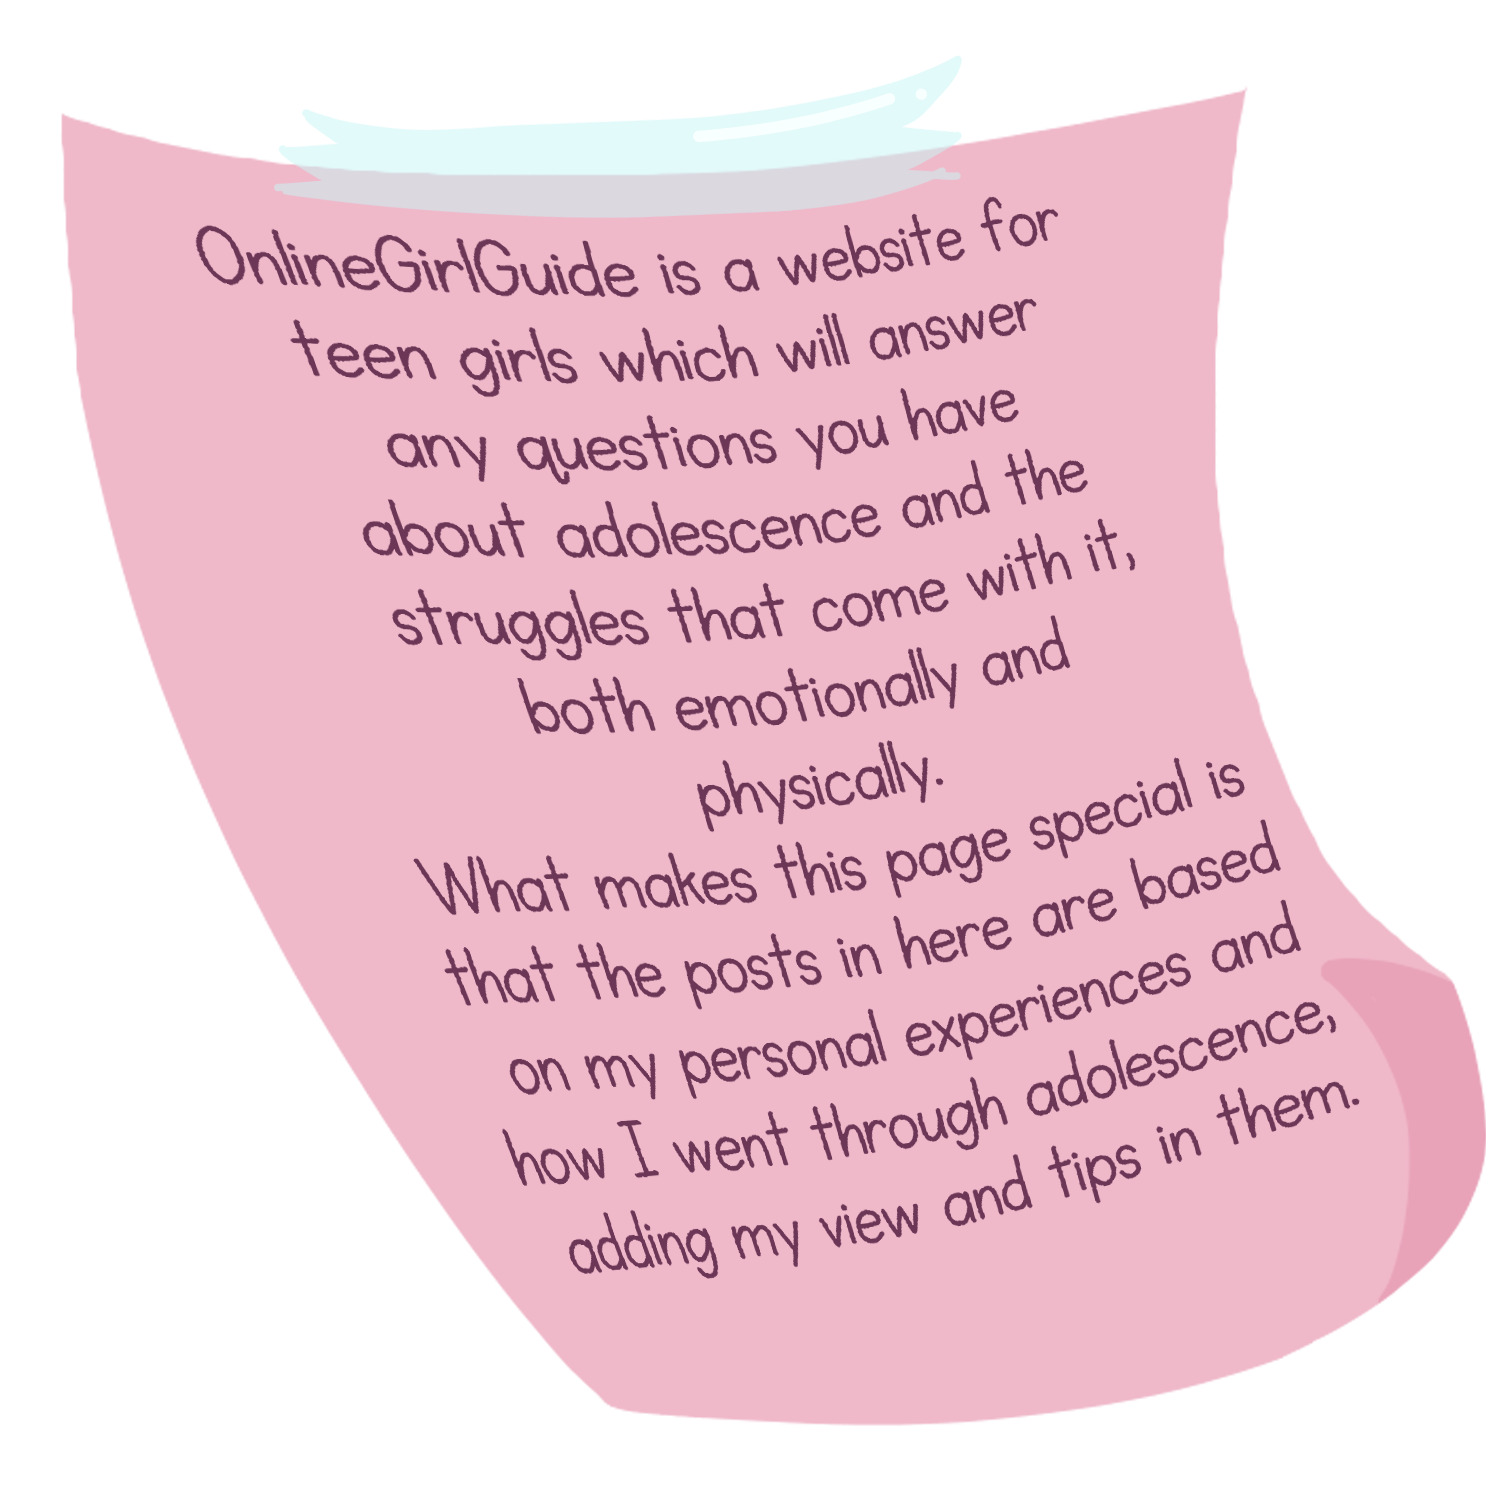 OnlineGirlGuide is a website for teen girls which will answer any questions you have about adolescence and the struggles that come with it, both emotionally and physically. What makes this page special is that the posts in here are based on my personal experiences and how I went through adolescence, adding my view and tips in them.